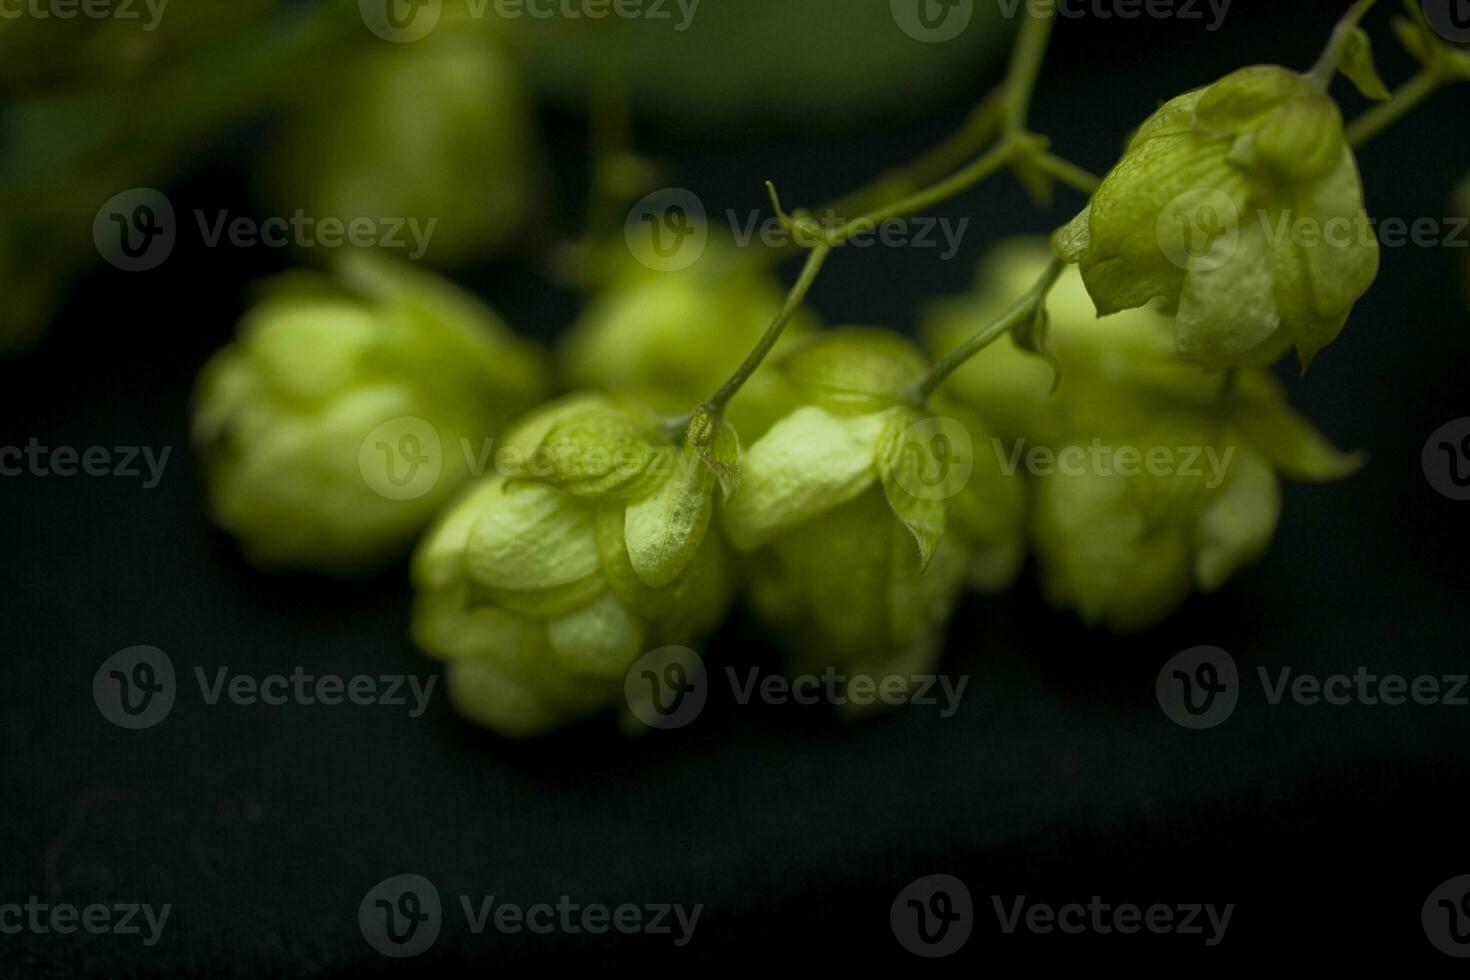 natural green hop cones on black isolated background in close-up photo